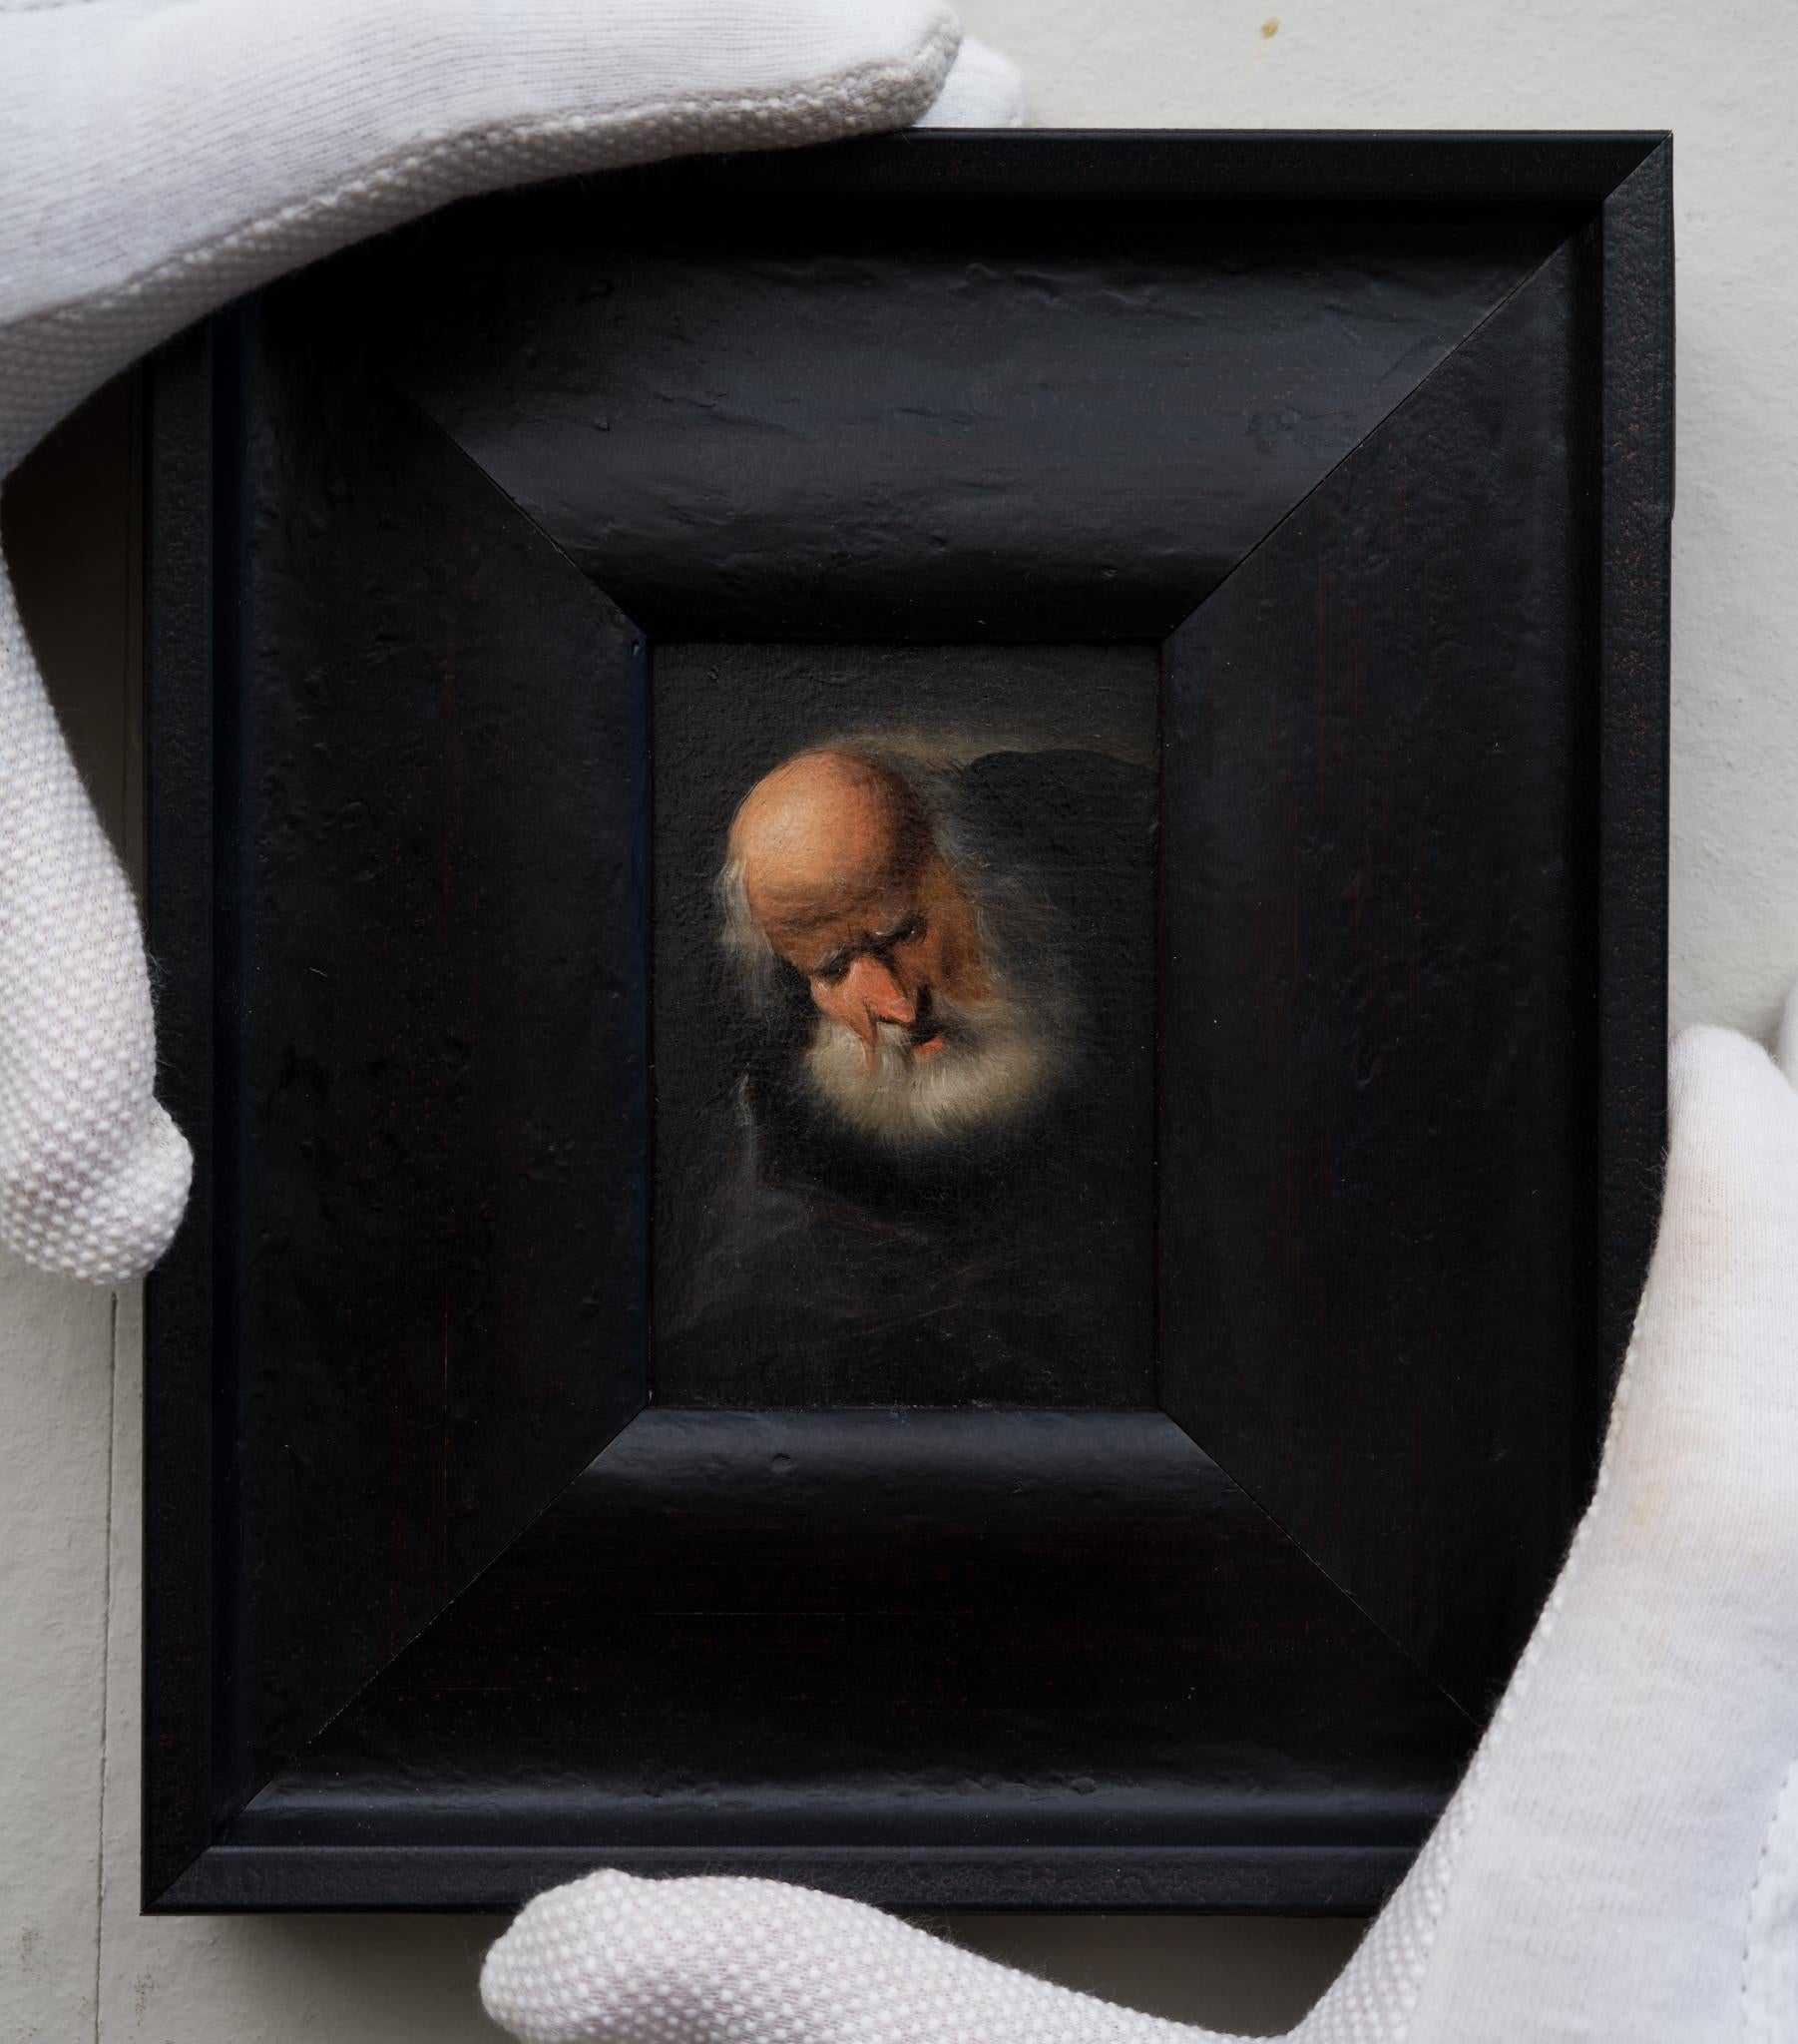  A Glimpse into History: Dietricy's Miniature Portrait - Painting by Christian Wilhelm Ernst Dietrich